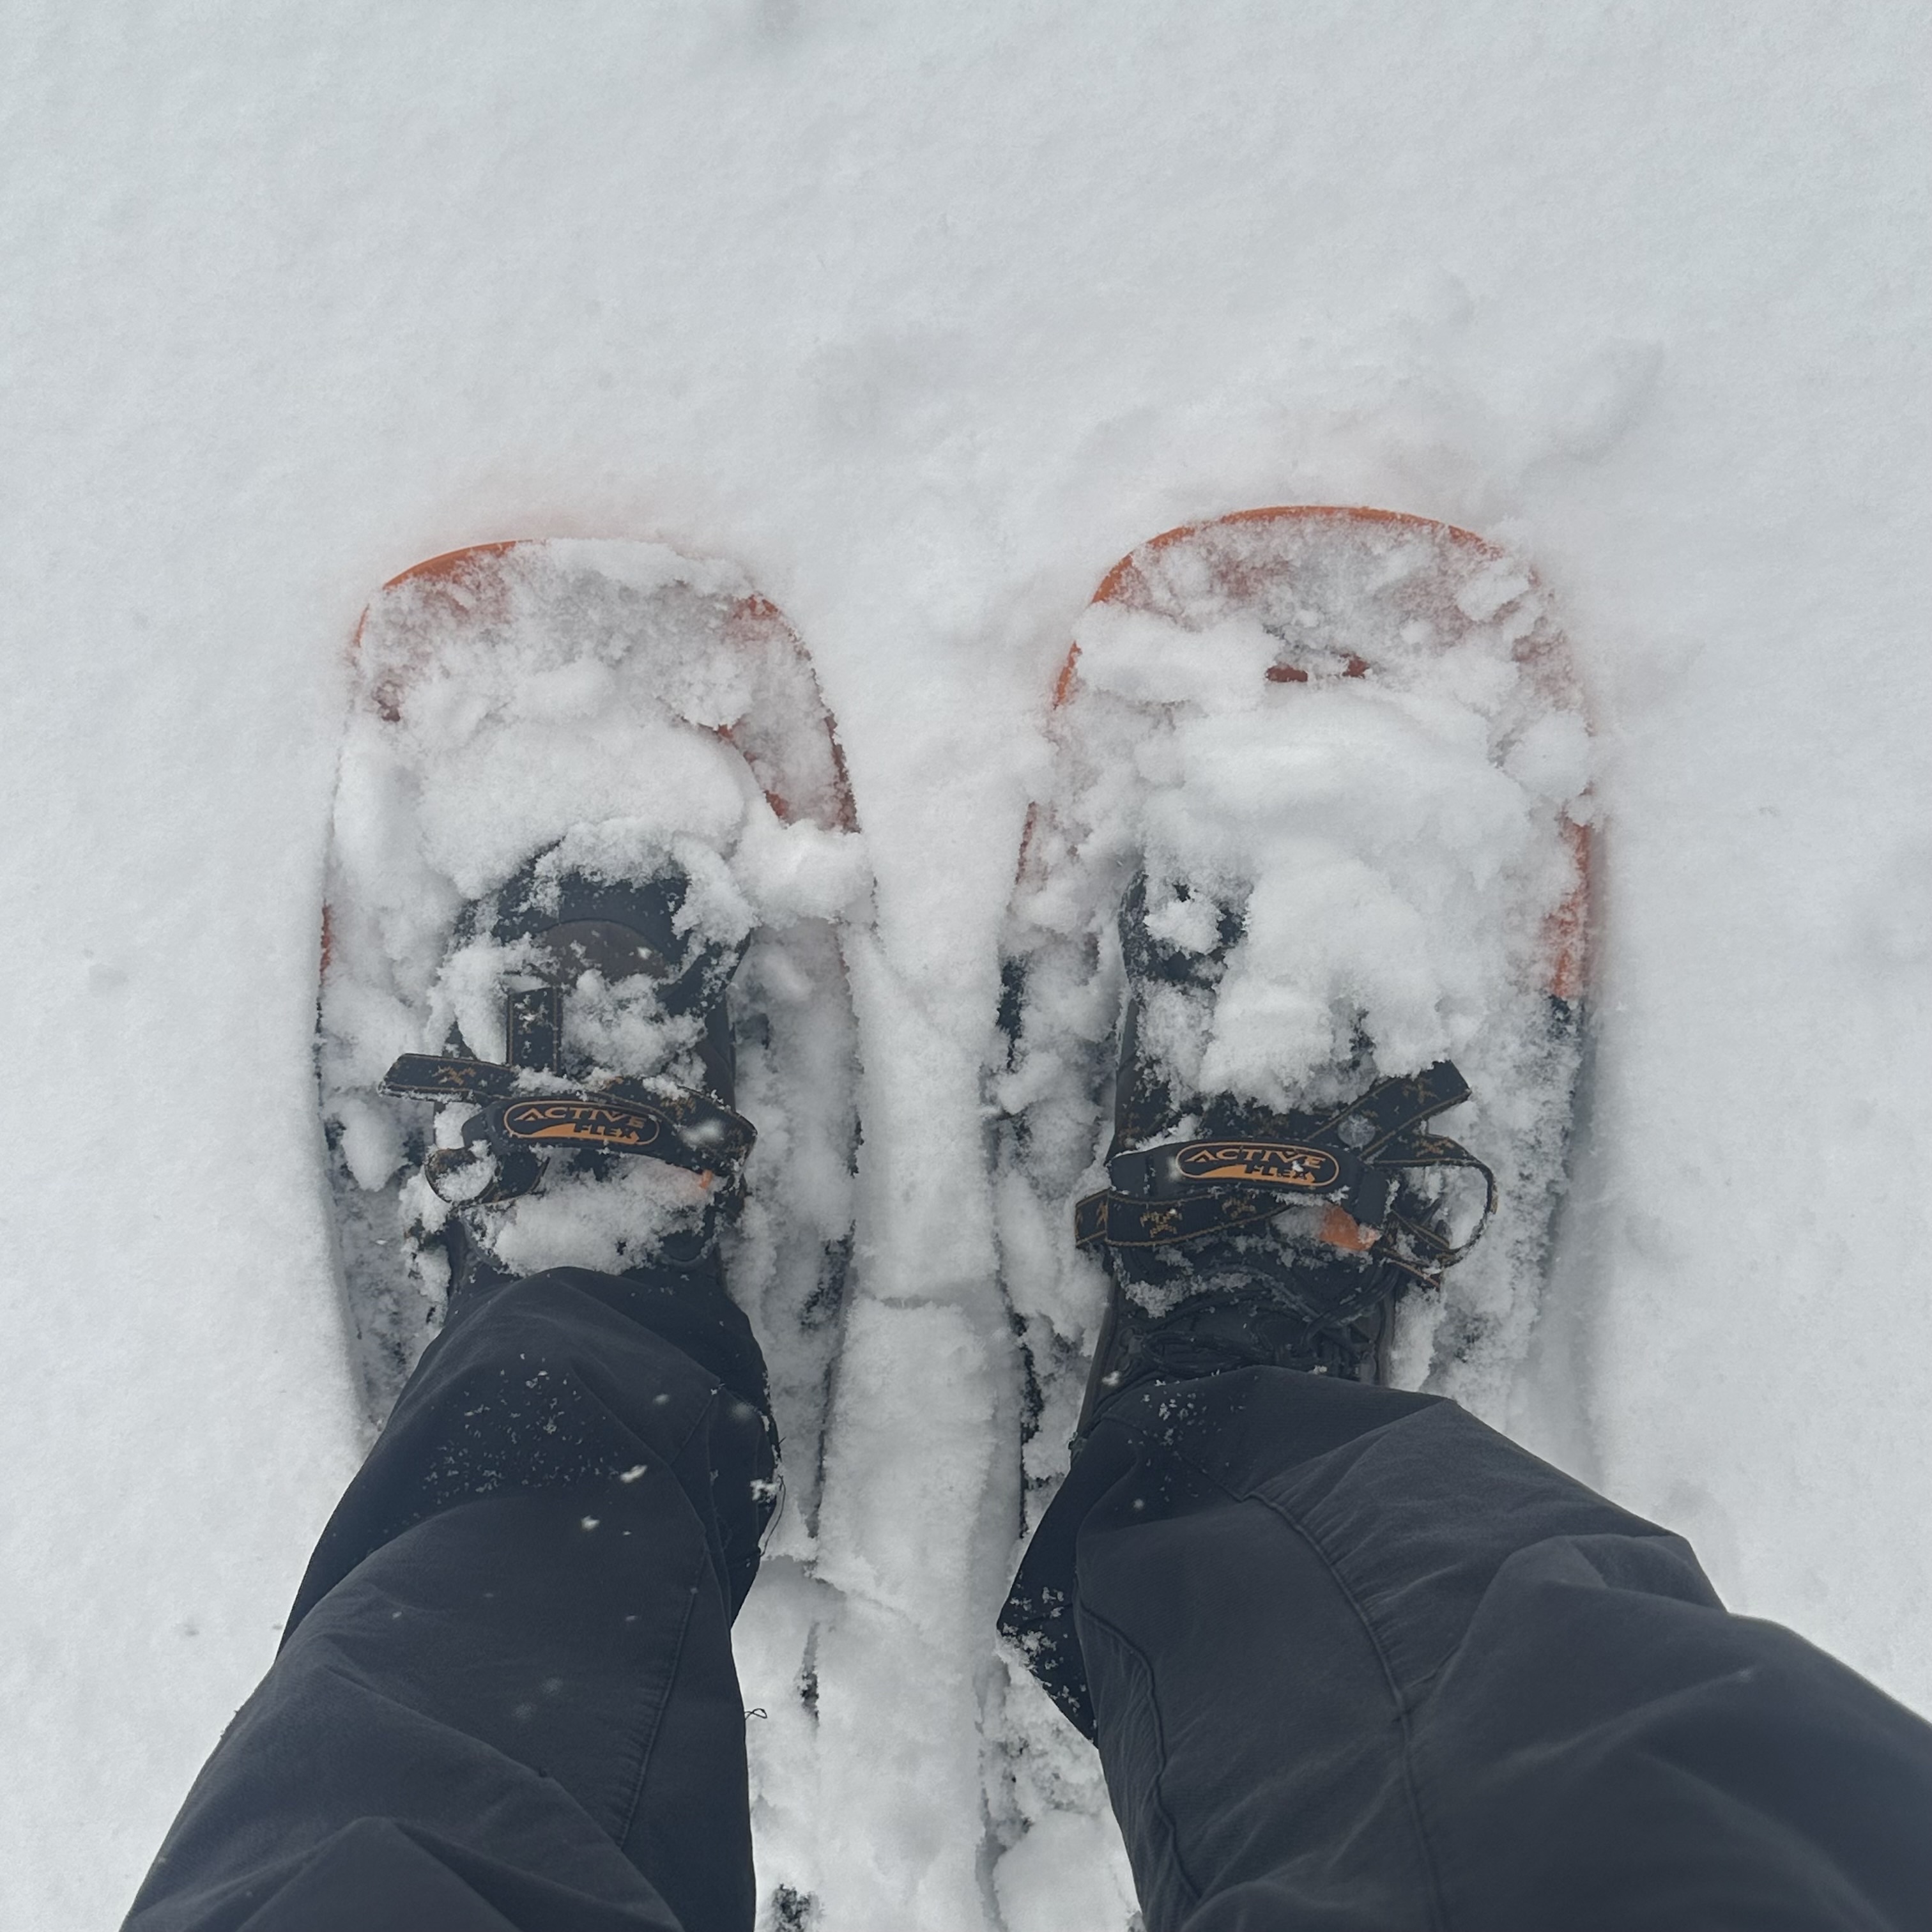 Point-of-view photo of my two snowshoe-clad feet standing in snow.